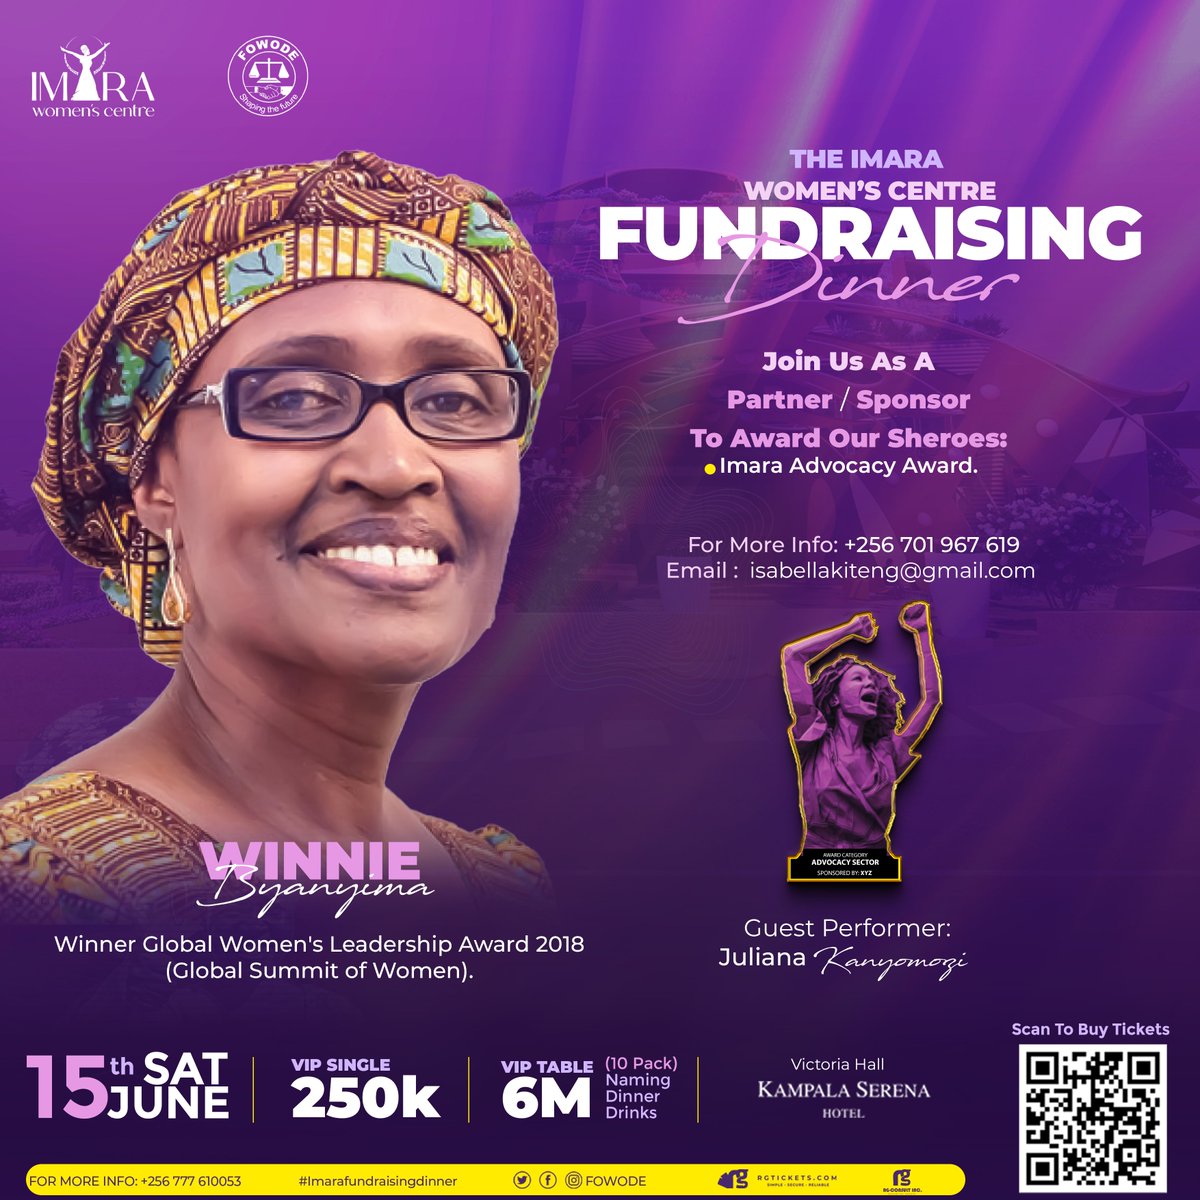 Did you know? Winnie Byanyima was honoured with the 2018 Global Women's Leadership Award by the Global Summit of Women. At the Imara Fundraising Dinner, we will celebrate such Sheroes like her! We call upon Corporate organizations, to sponsor any of these awards kindly contact